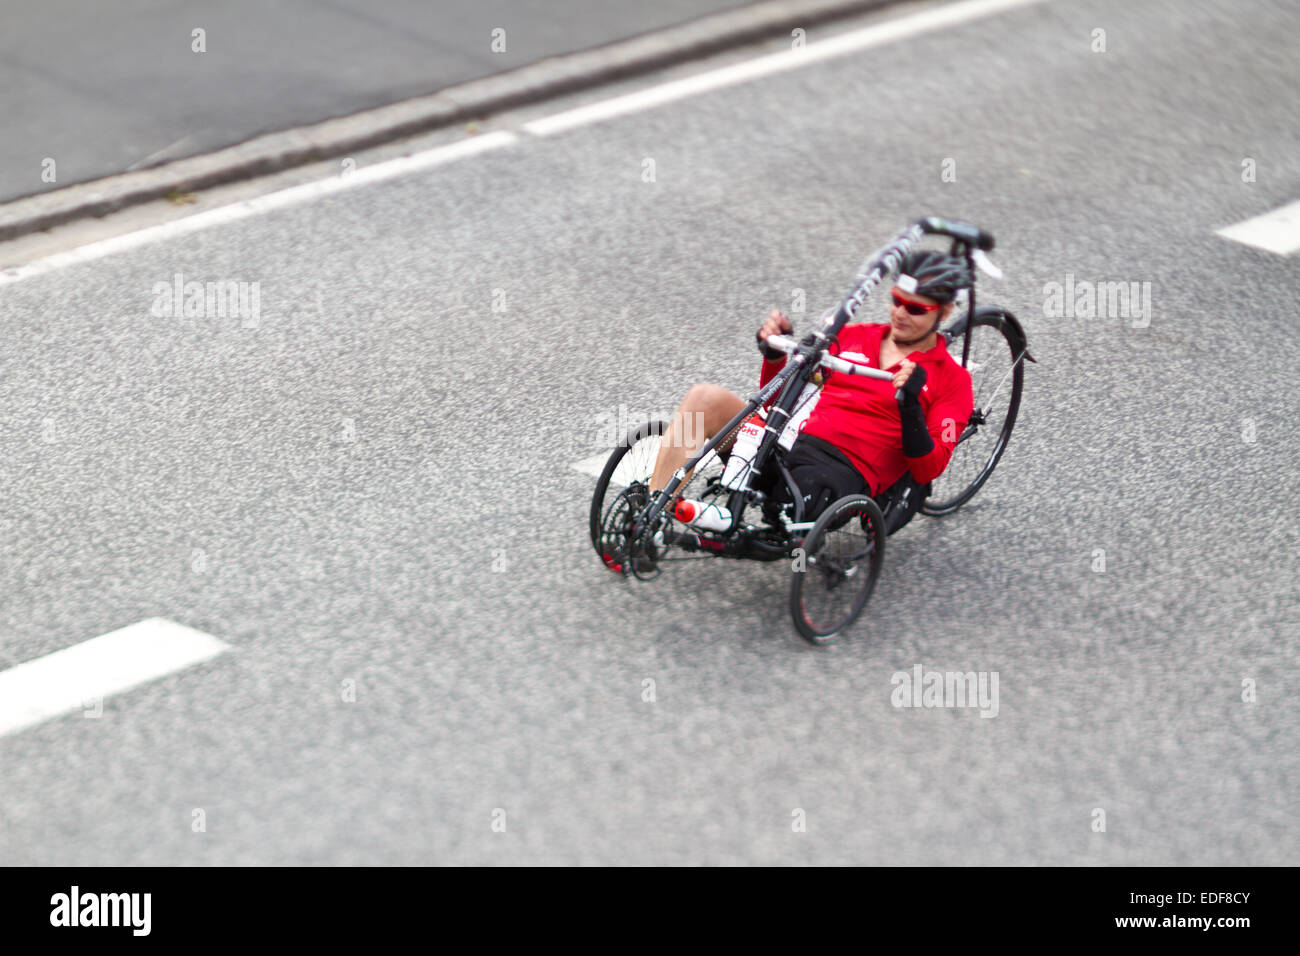 Handicaped Man on bike during an iron man competition in Denmark Stock Photo